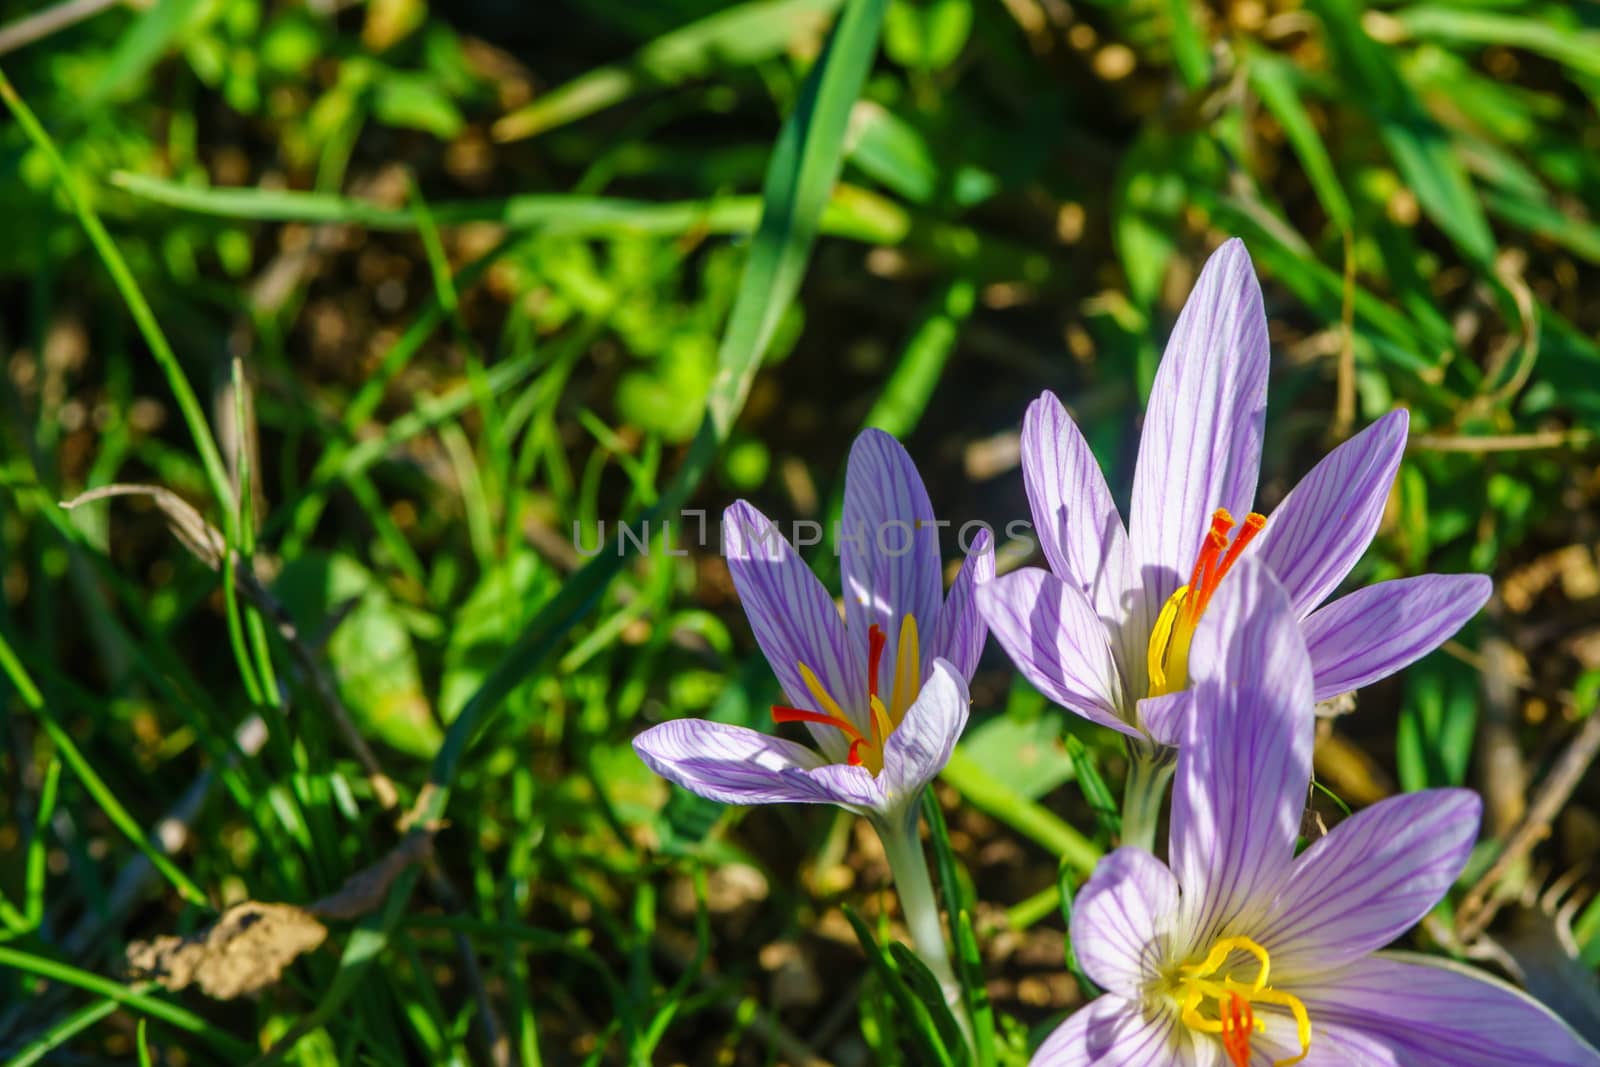 View of a Crocus pallasii flower, in the Upper Galilee, Northern Israel